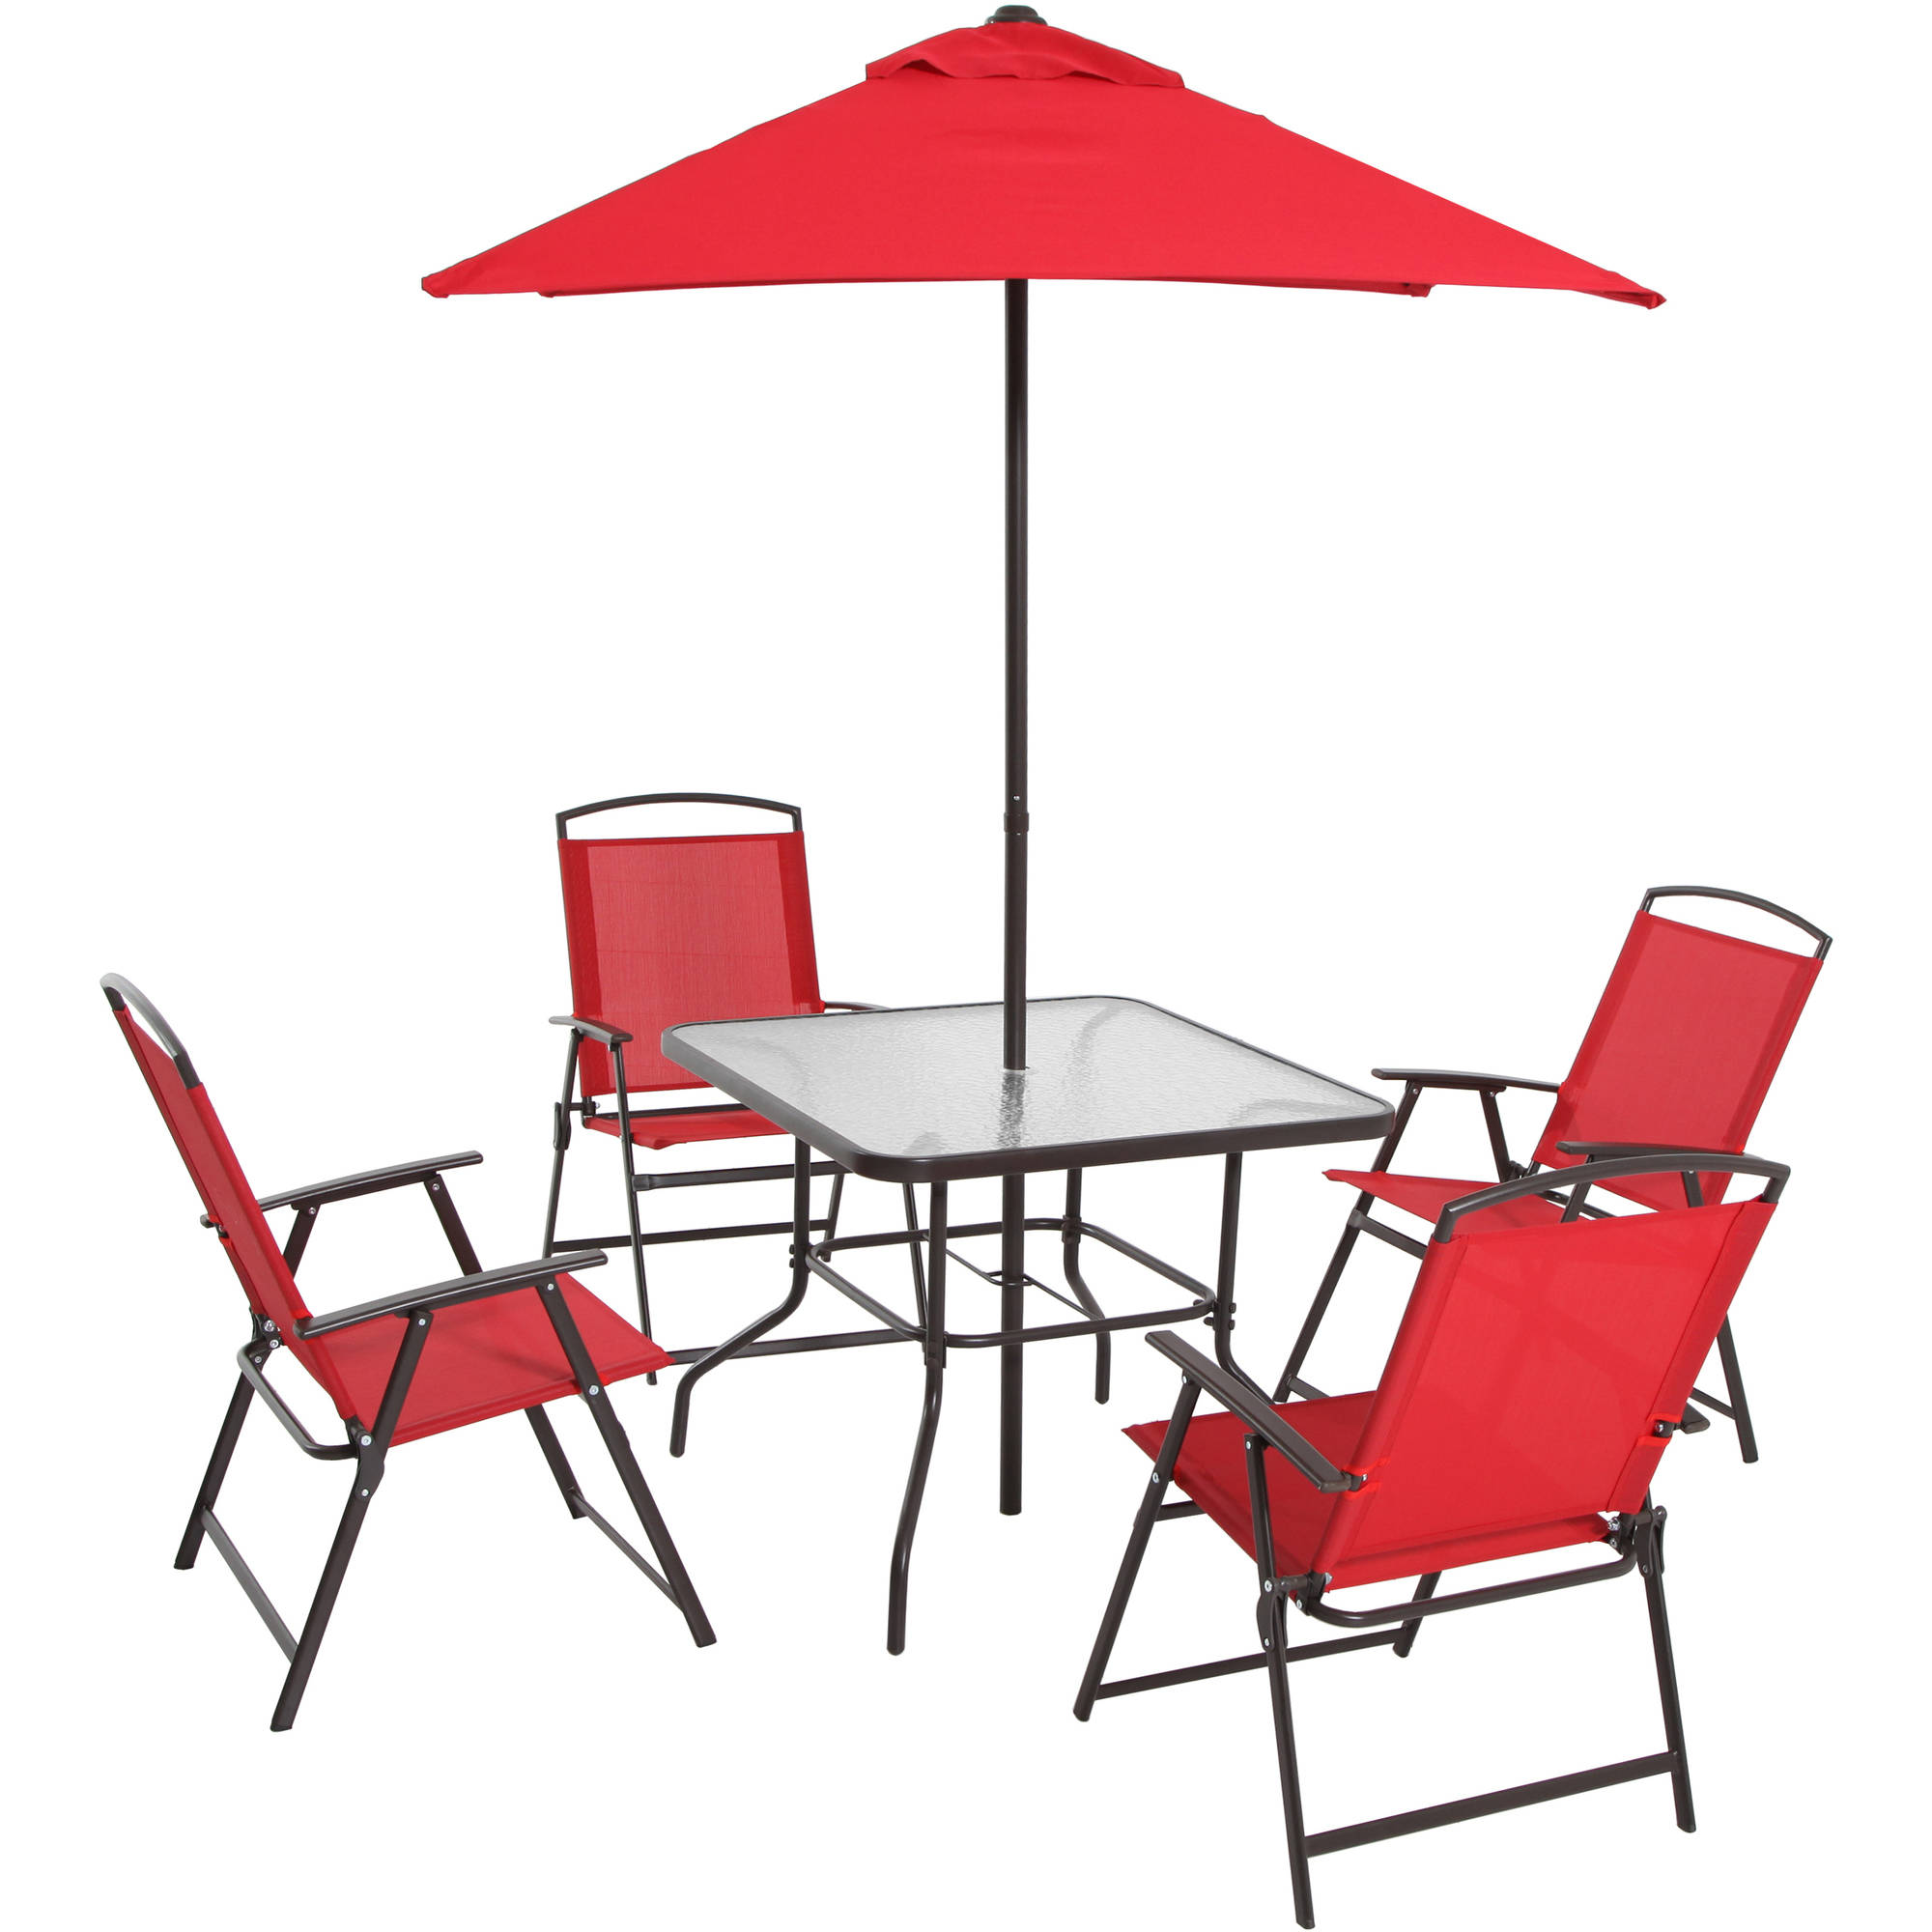 Mainstays Albany Lane Steel Outdoor Patio Dining Set of 6, Red - image 1 of 12